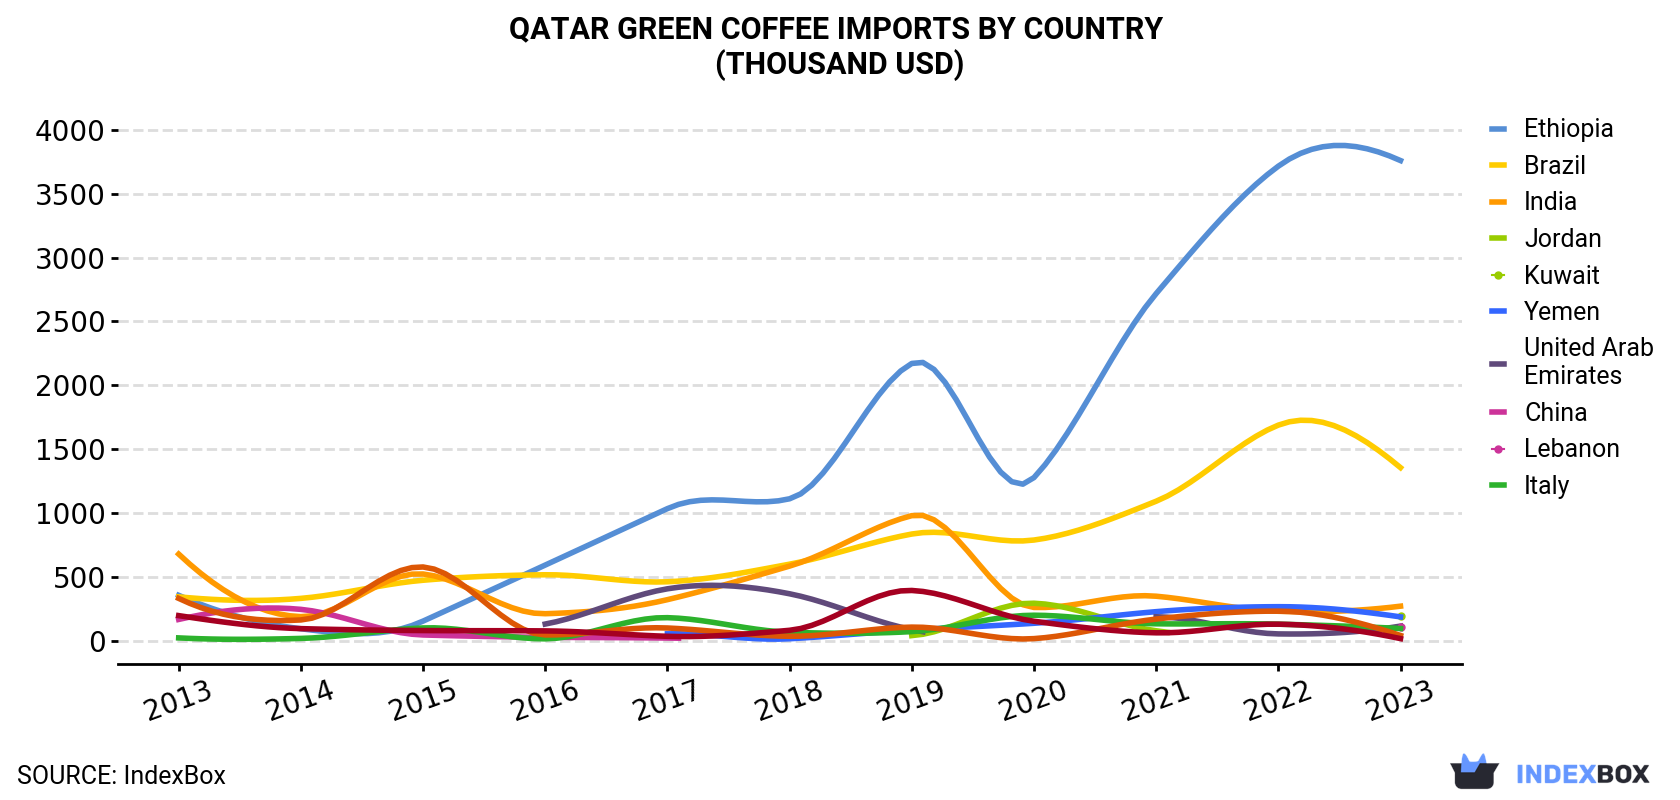 Qatar Green Coffee Imports By Country (Thousand USD)